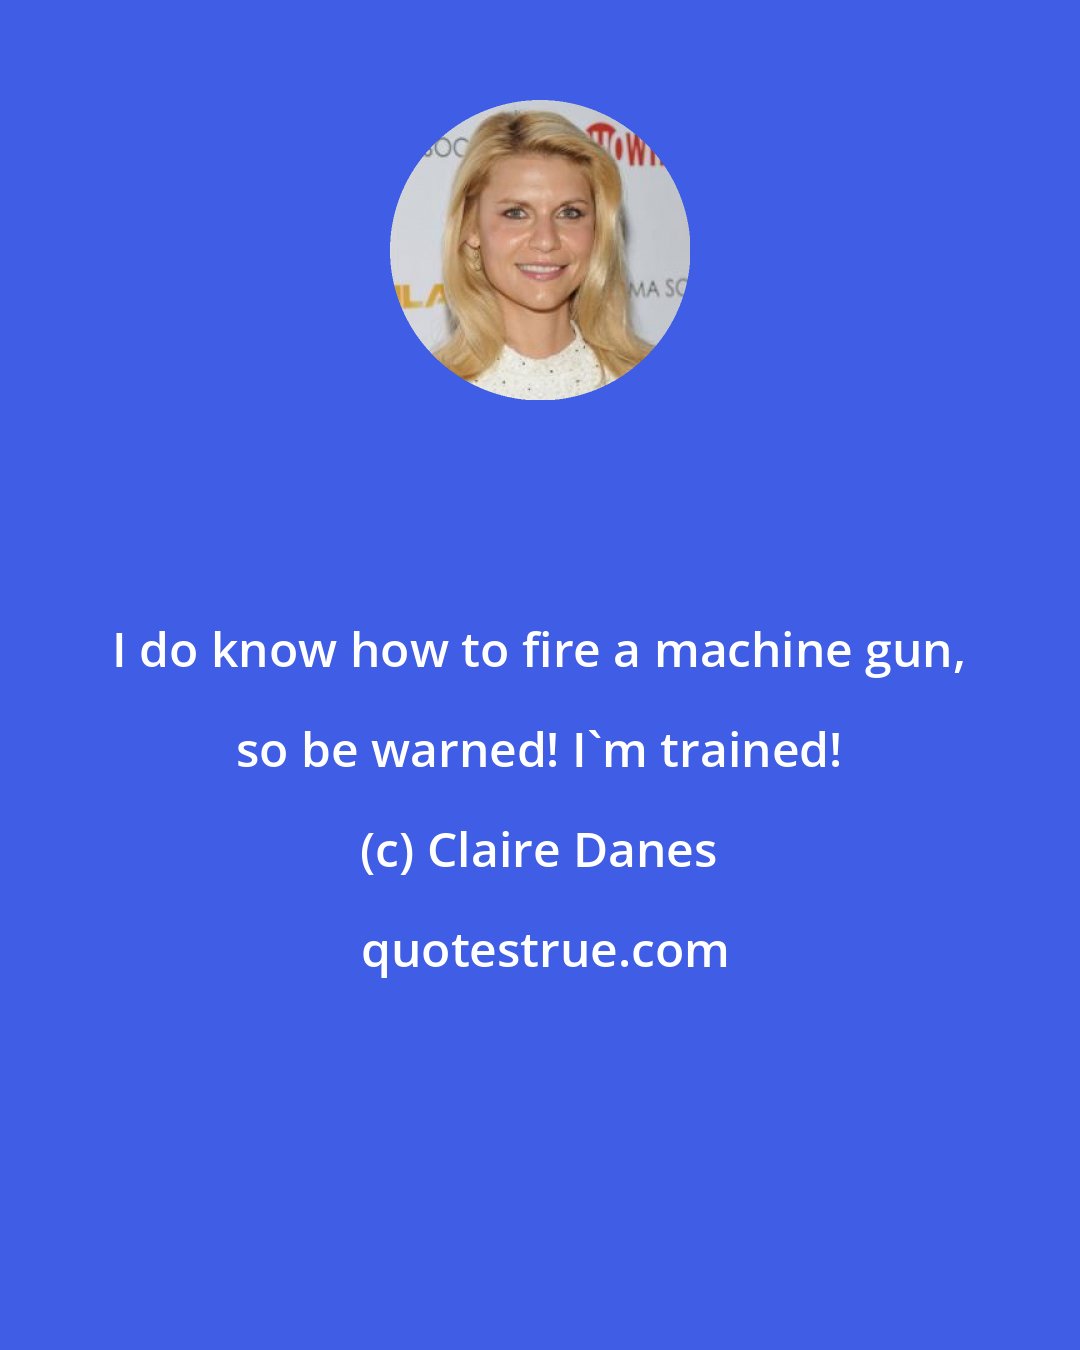 Claire Danes: I do know how to fire a machine gun, so be warned! I'm trained!